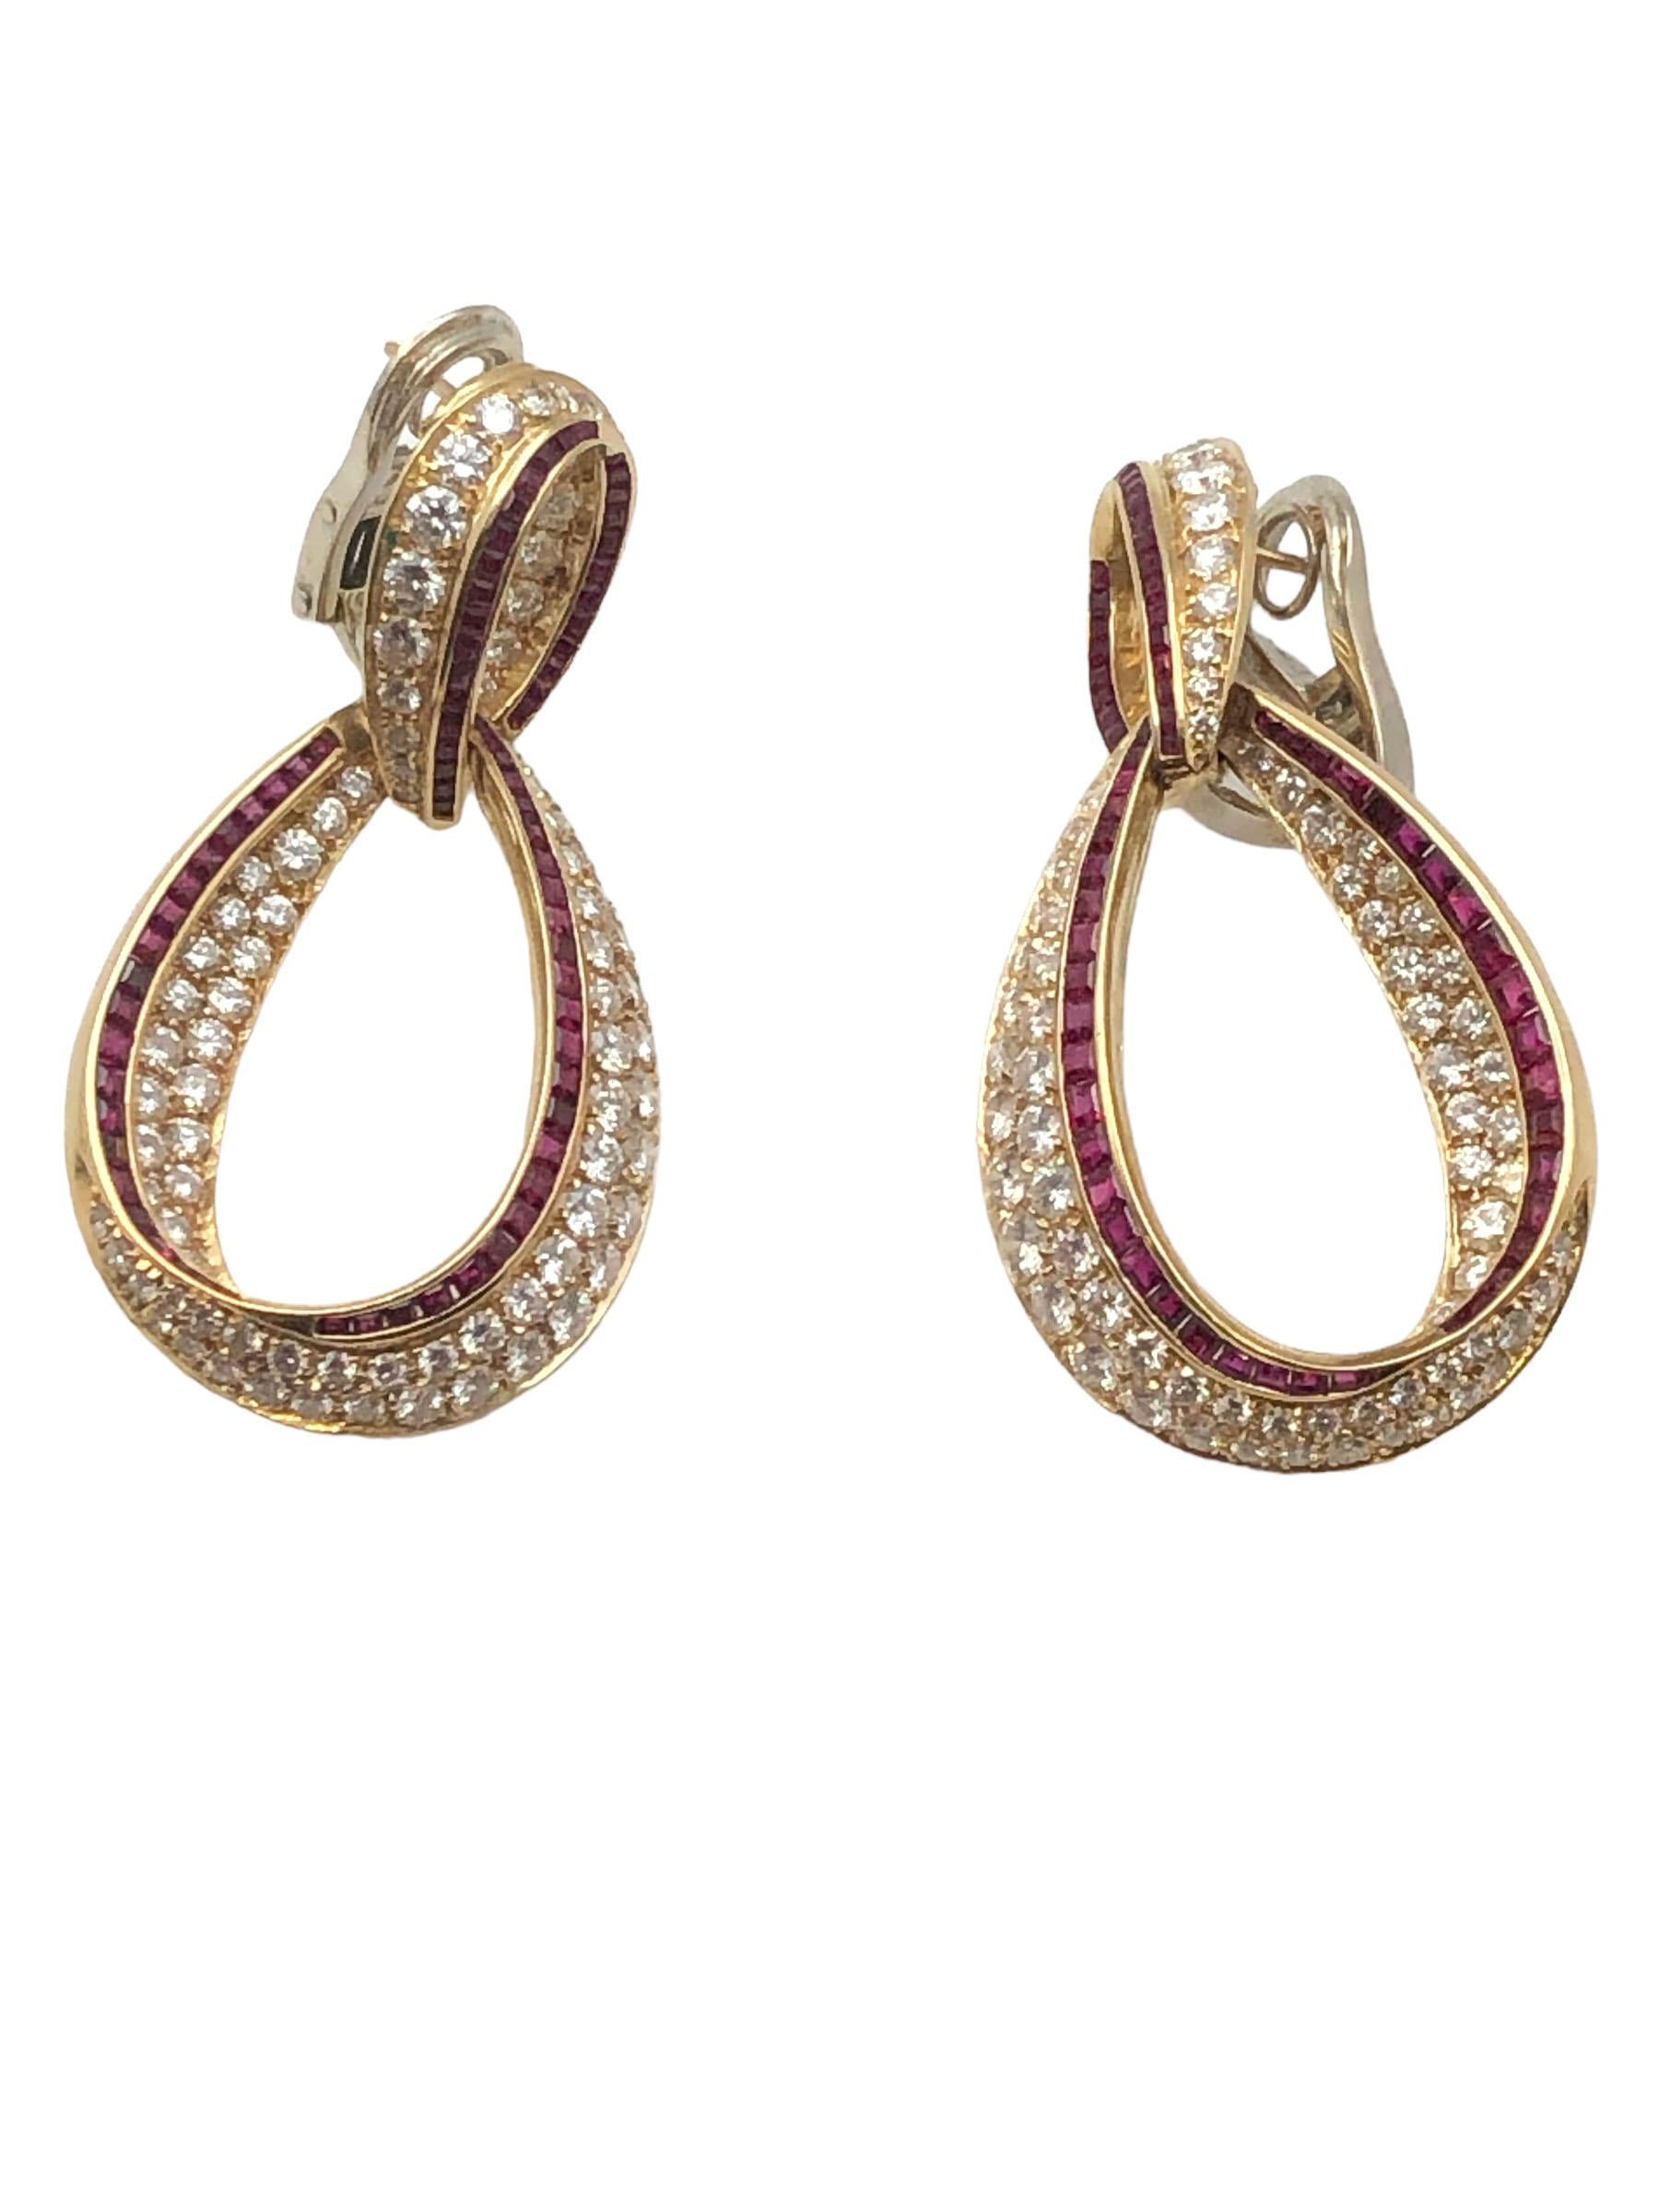 Round Cut Sidney Garber Yellow Gold, Diamond and Ruby Large Inside Out Dangle Hoop Earring For Sale